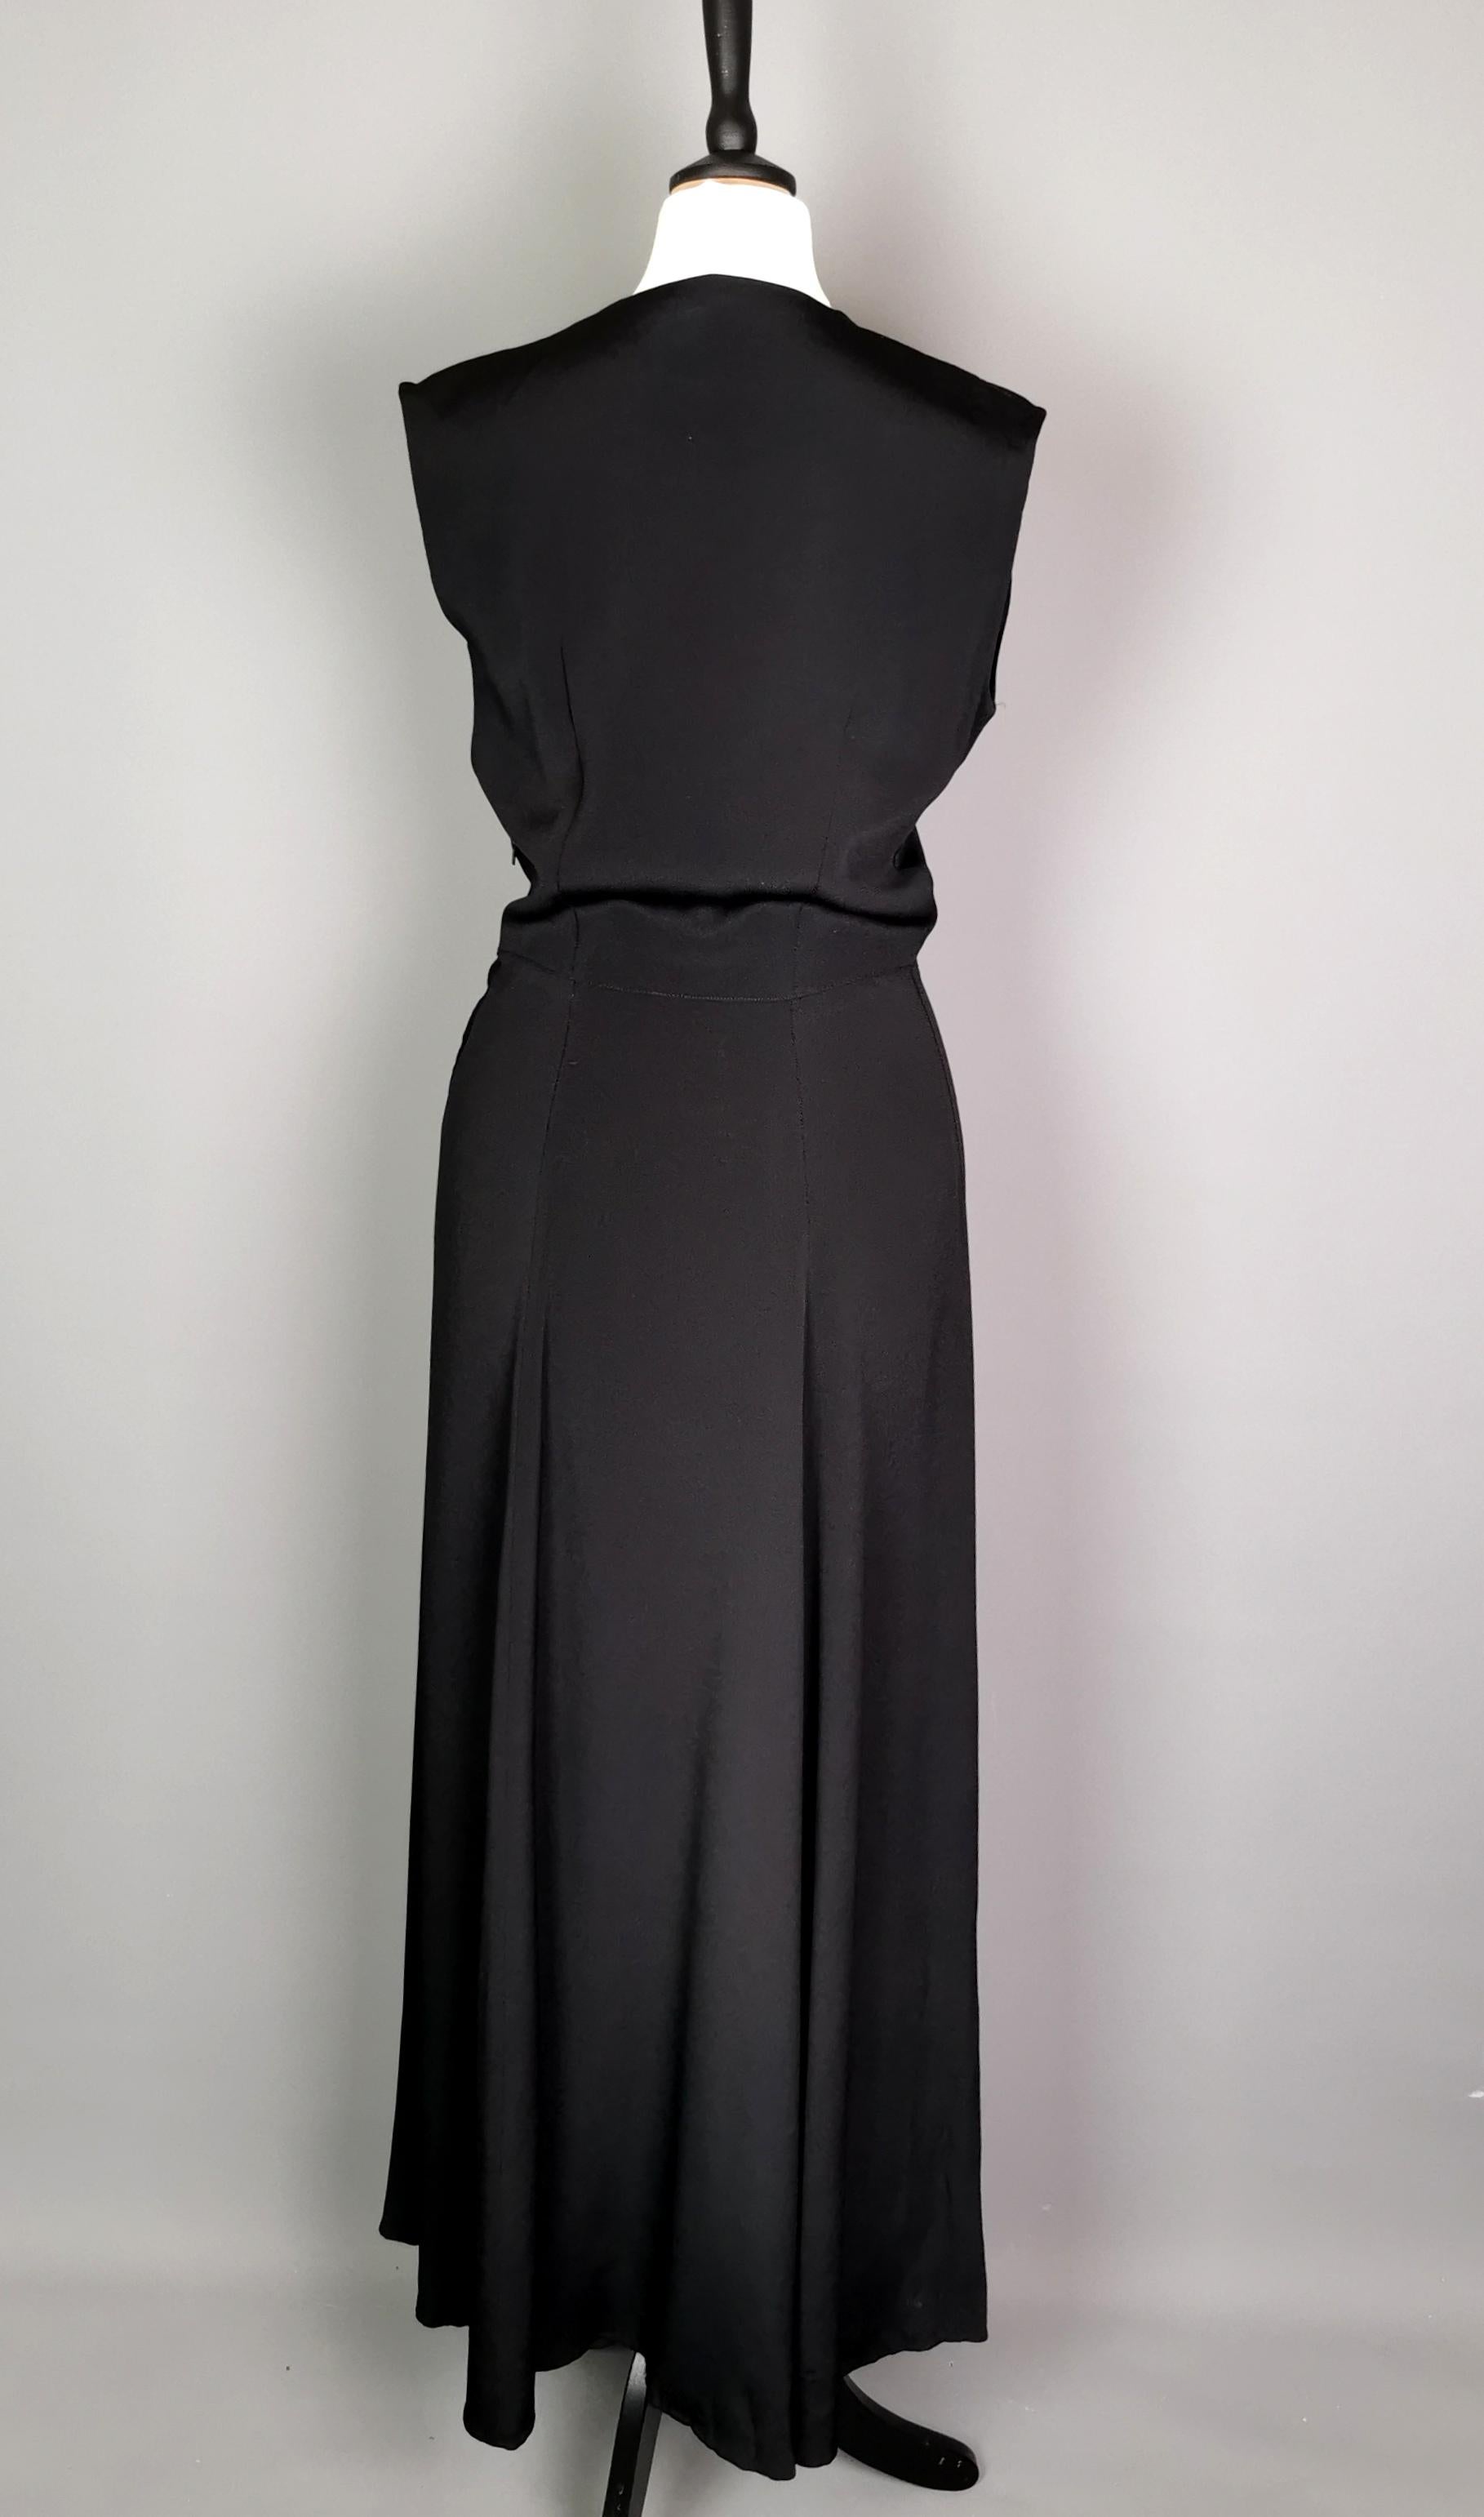 Vintage 1930s Black rayon crepe bombshell dress, gold lame, evening gown  For Sale 2